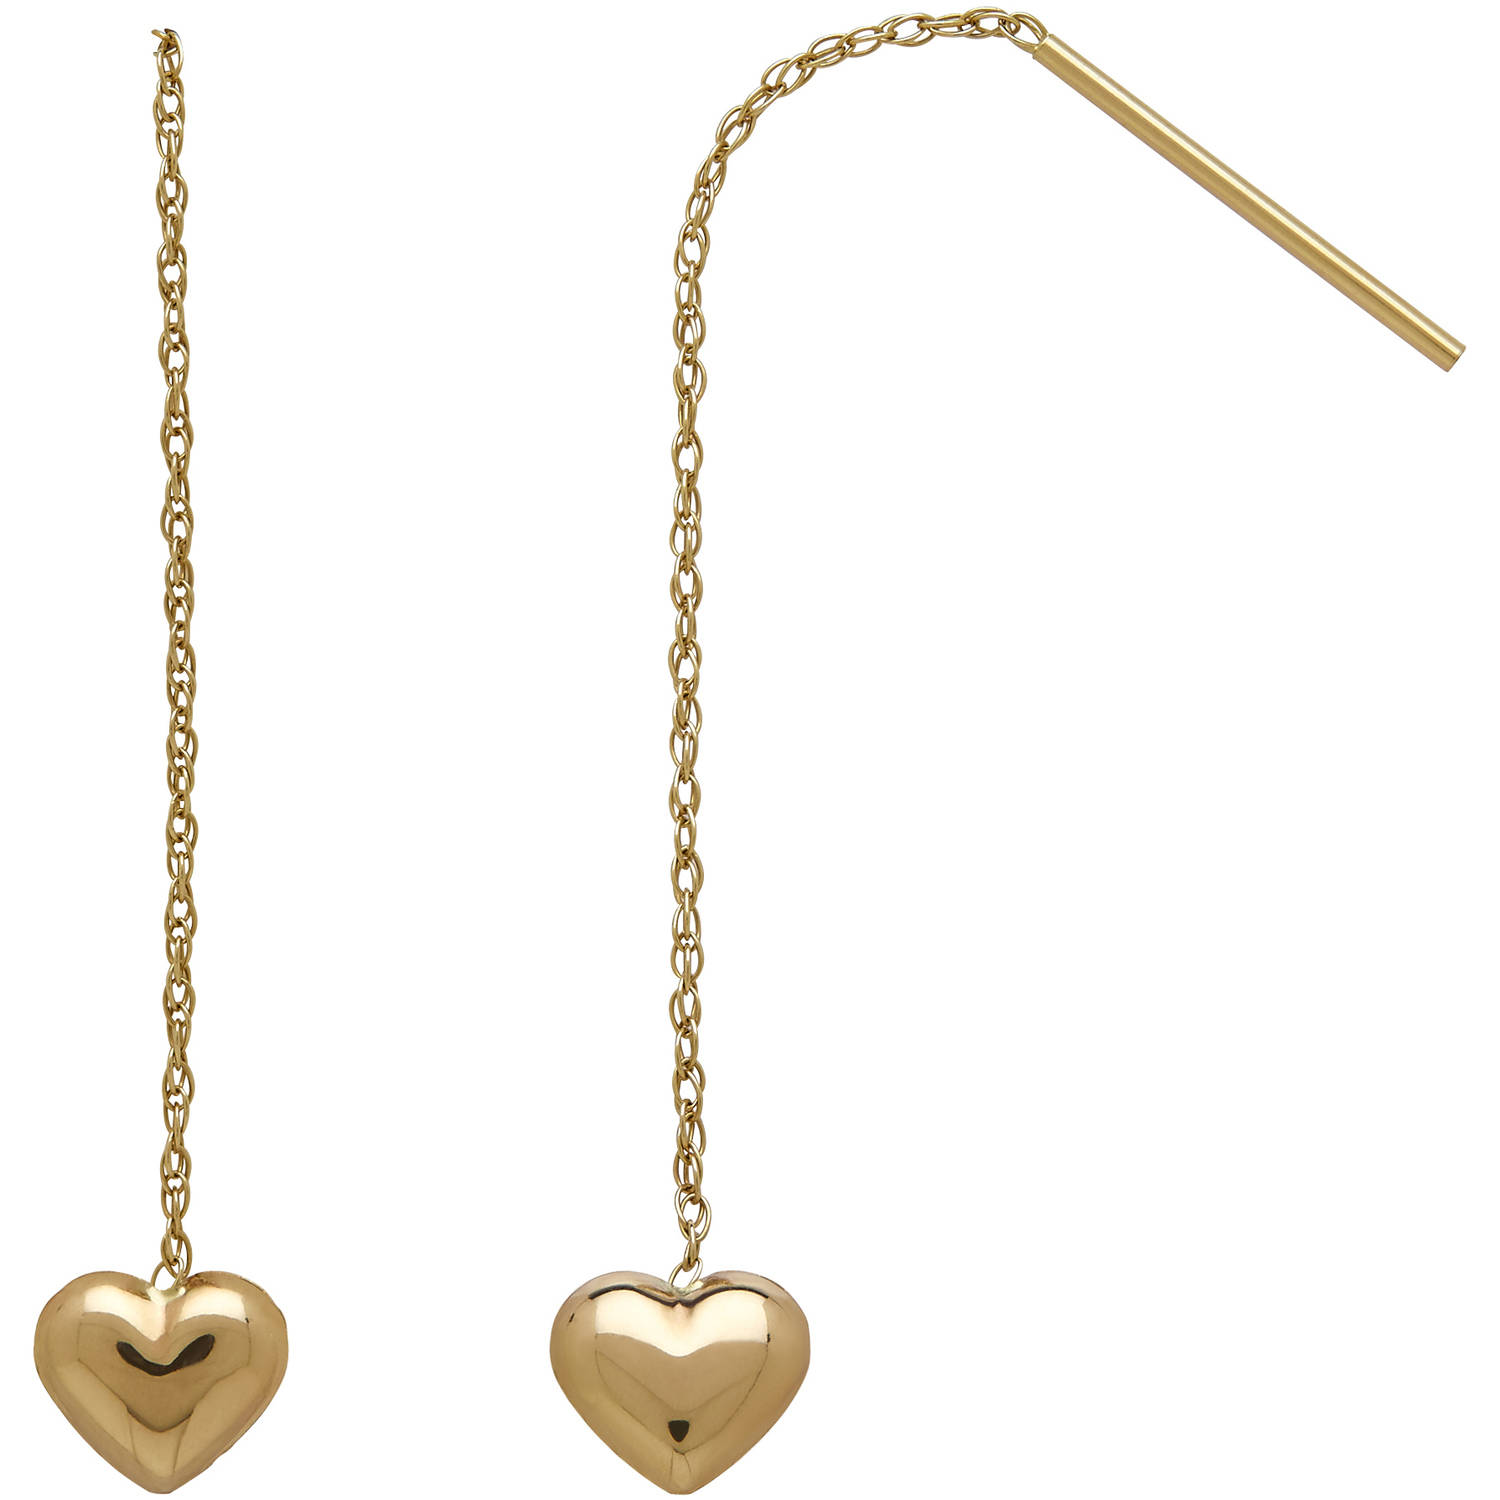 Simply Gold  10kt Yellow Gold Heart Thr - image 1 of 1